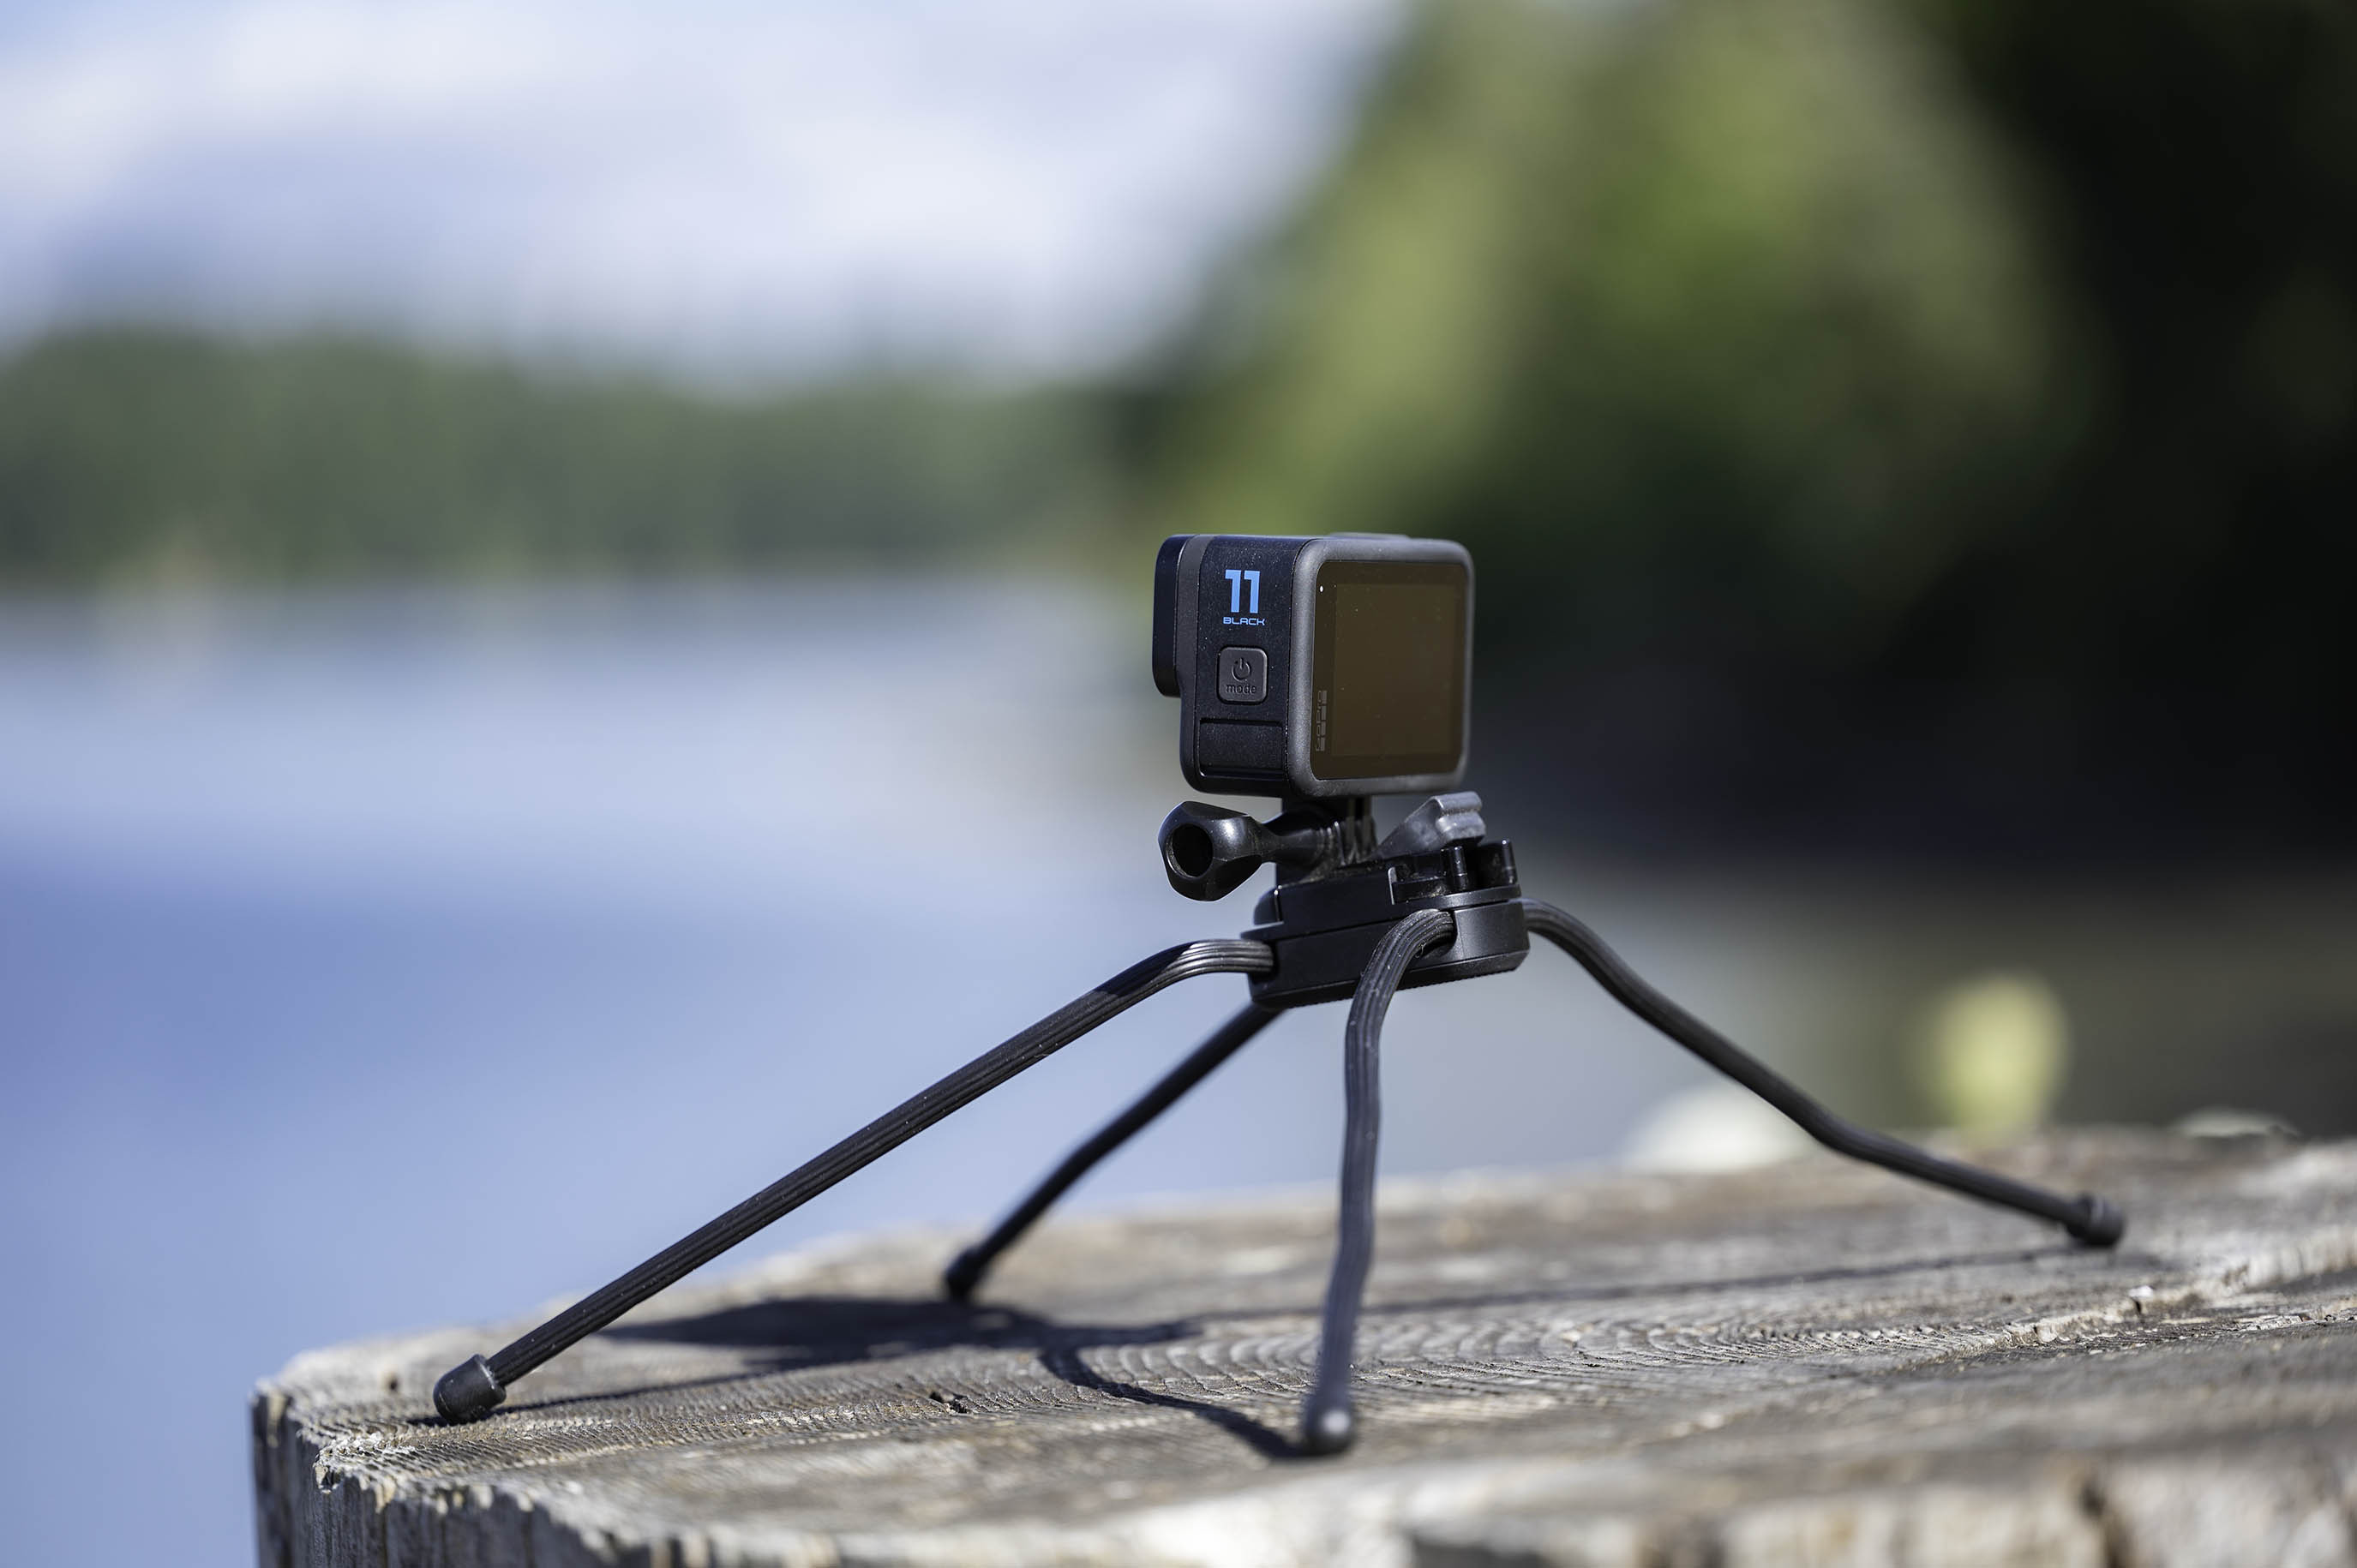 The GoPro Hero 11 Black on the Gumby tripod.